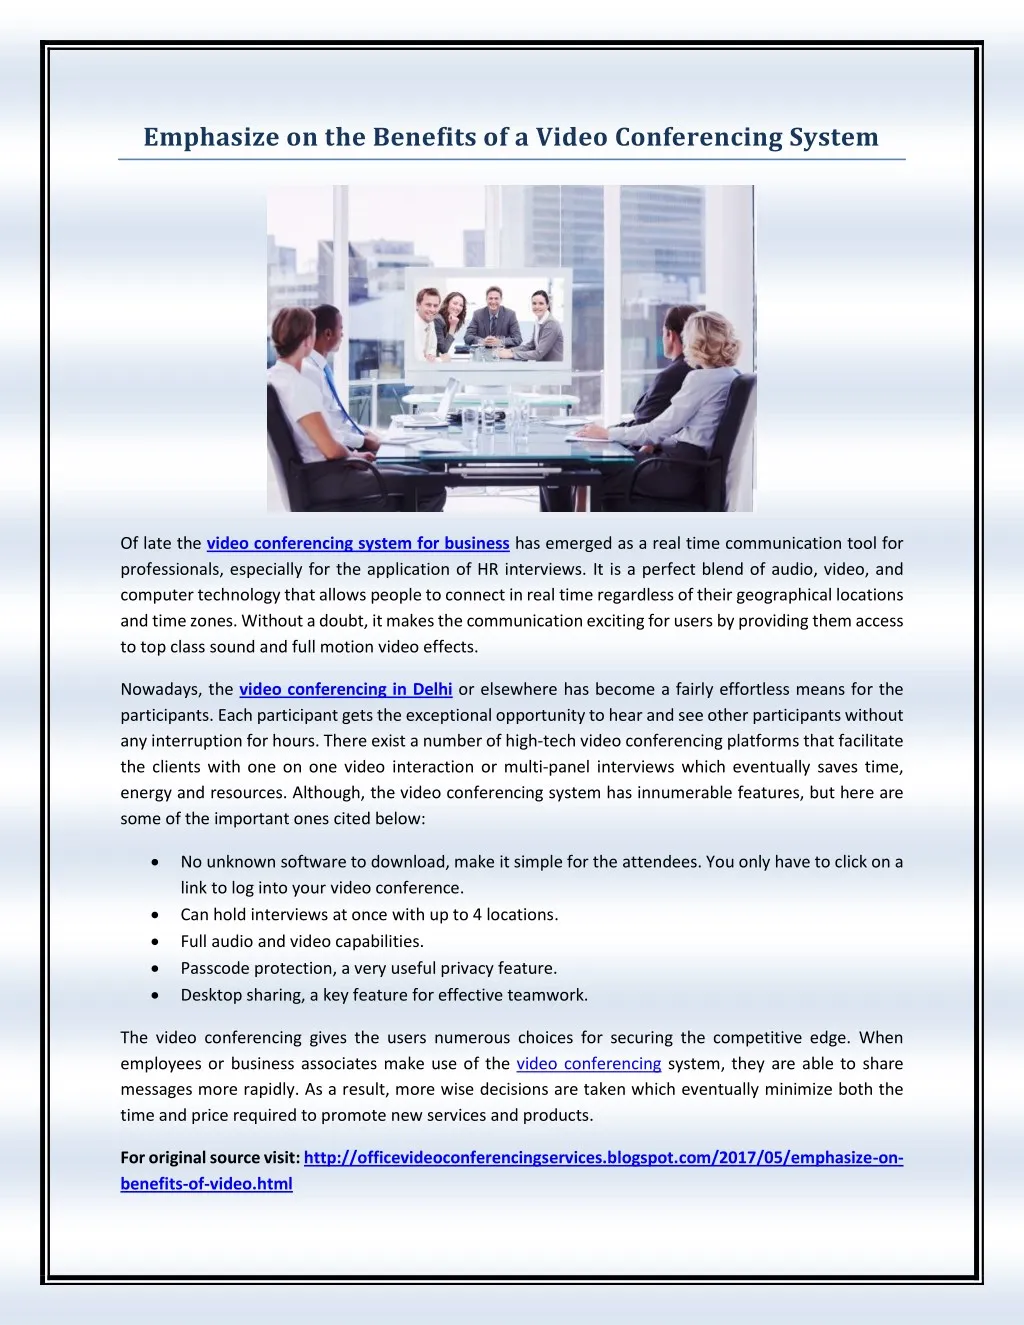 emphasize on the benefits of a video conferencing